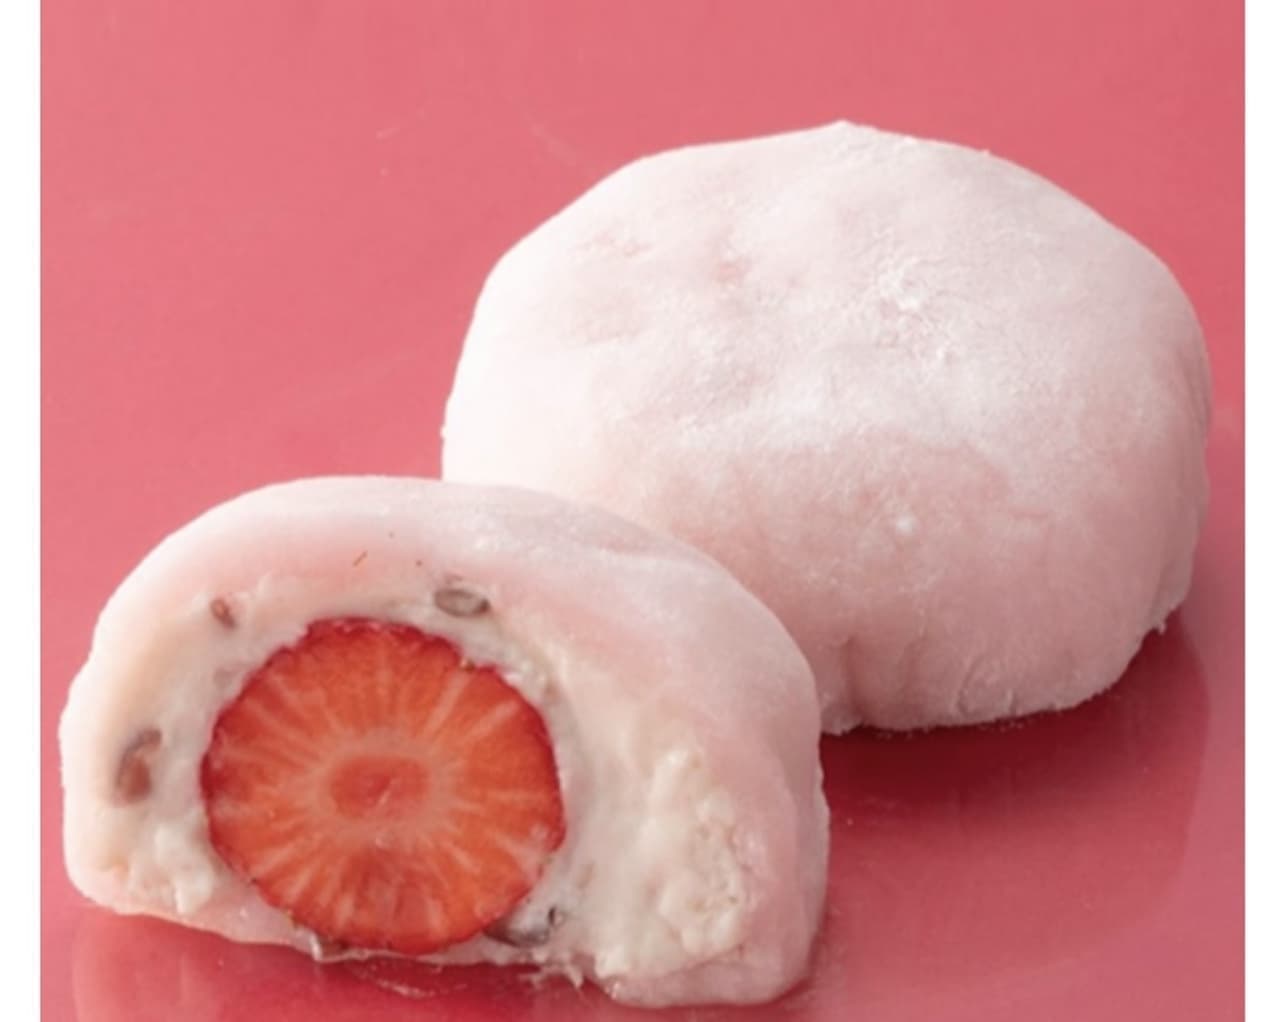 Chateraise "Whipped Cream Daifuku with a Grain of Strawberry